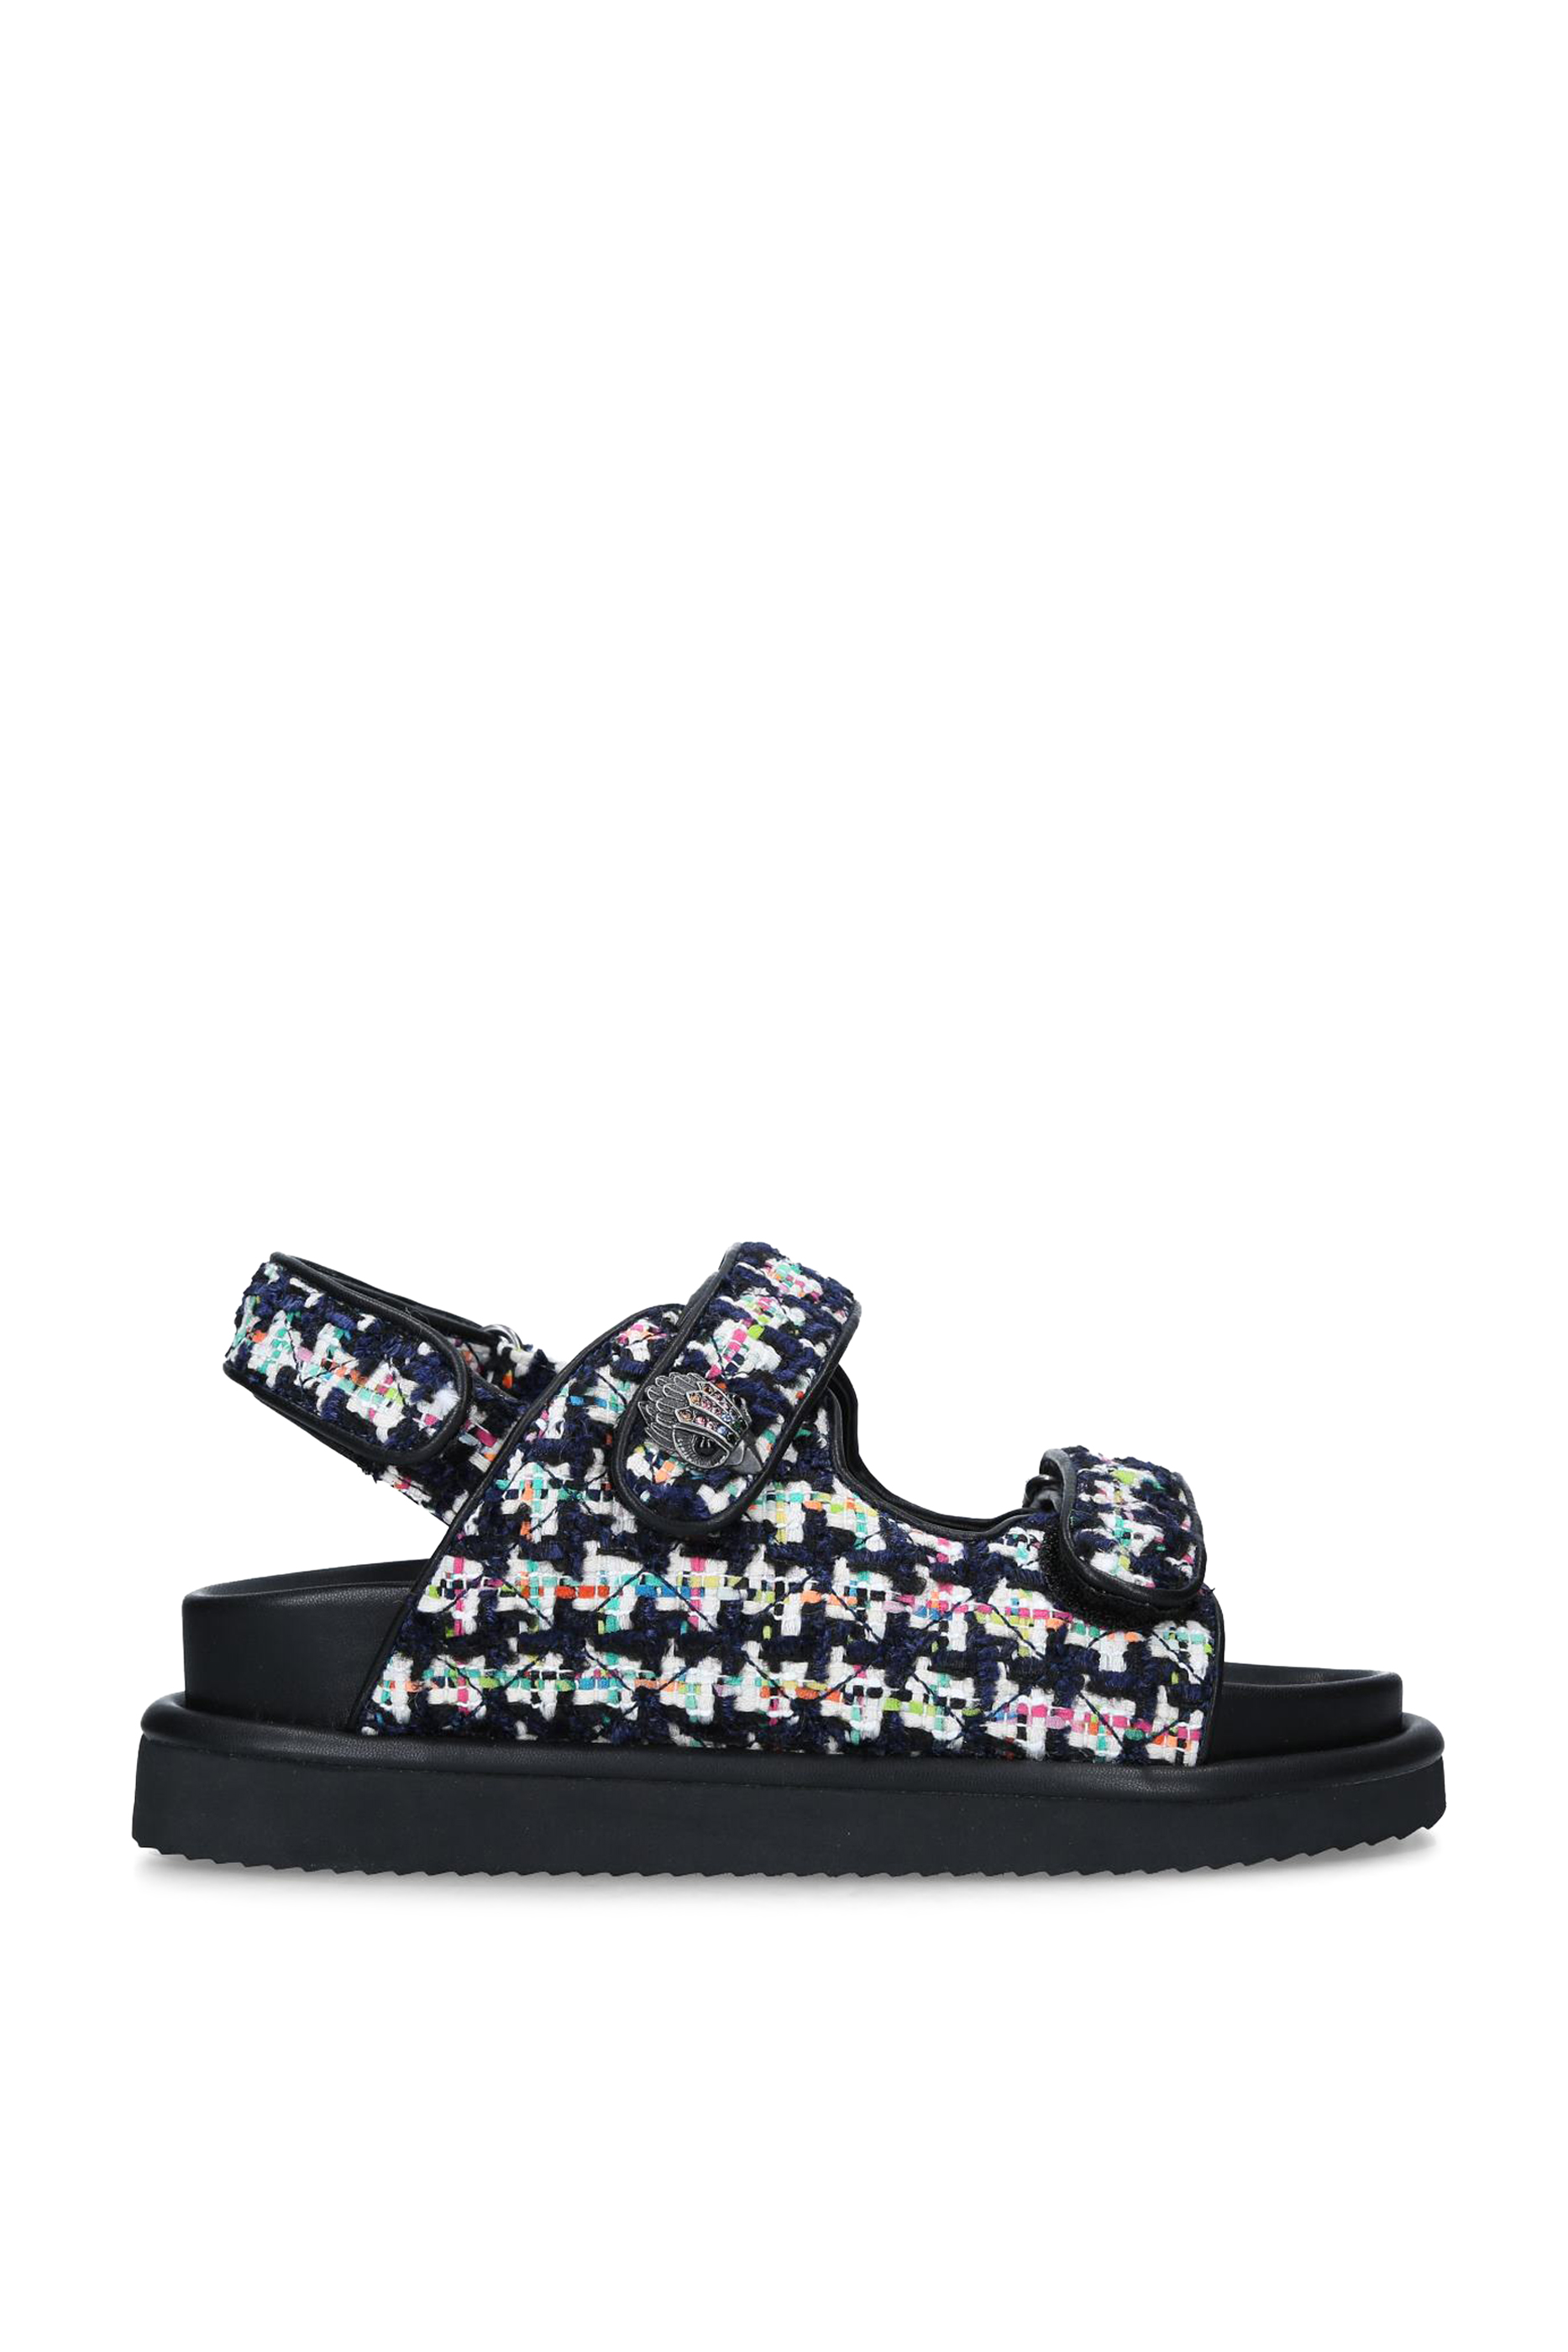 Buy Kurt Geiger London Orson Tweed Chunky Sandals - Womens for AED 200. ...